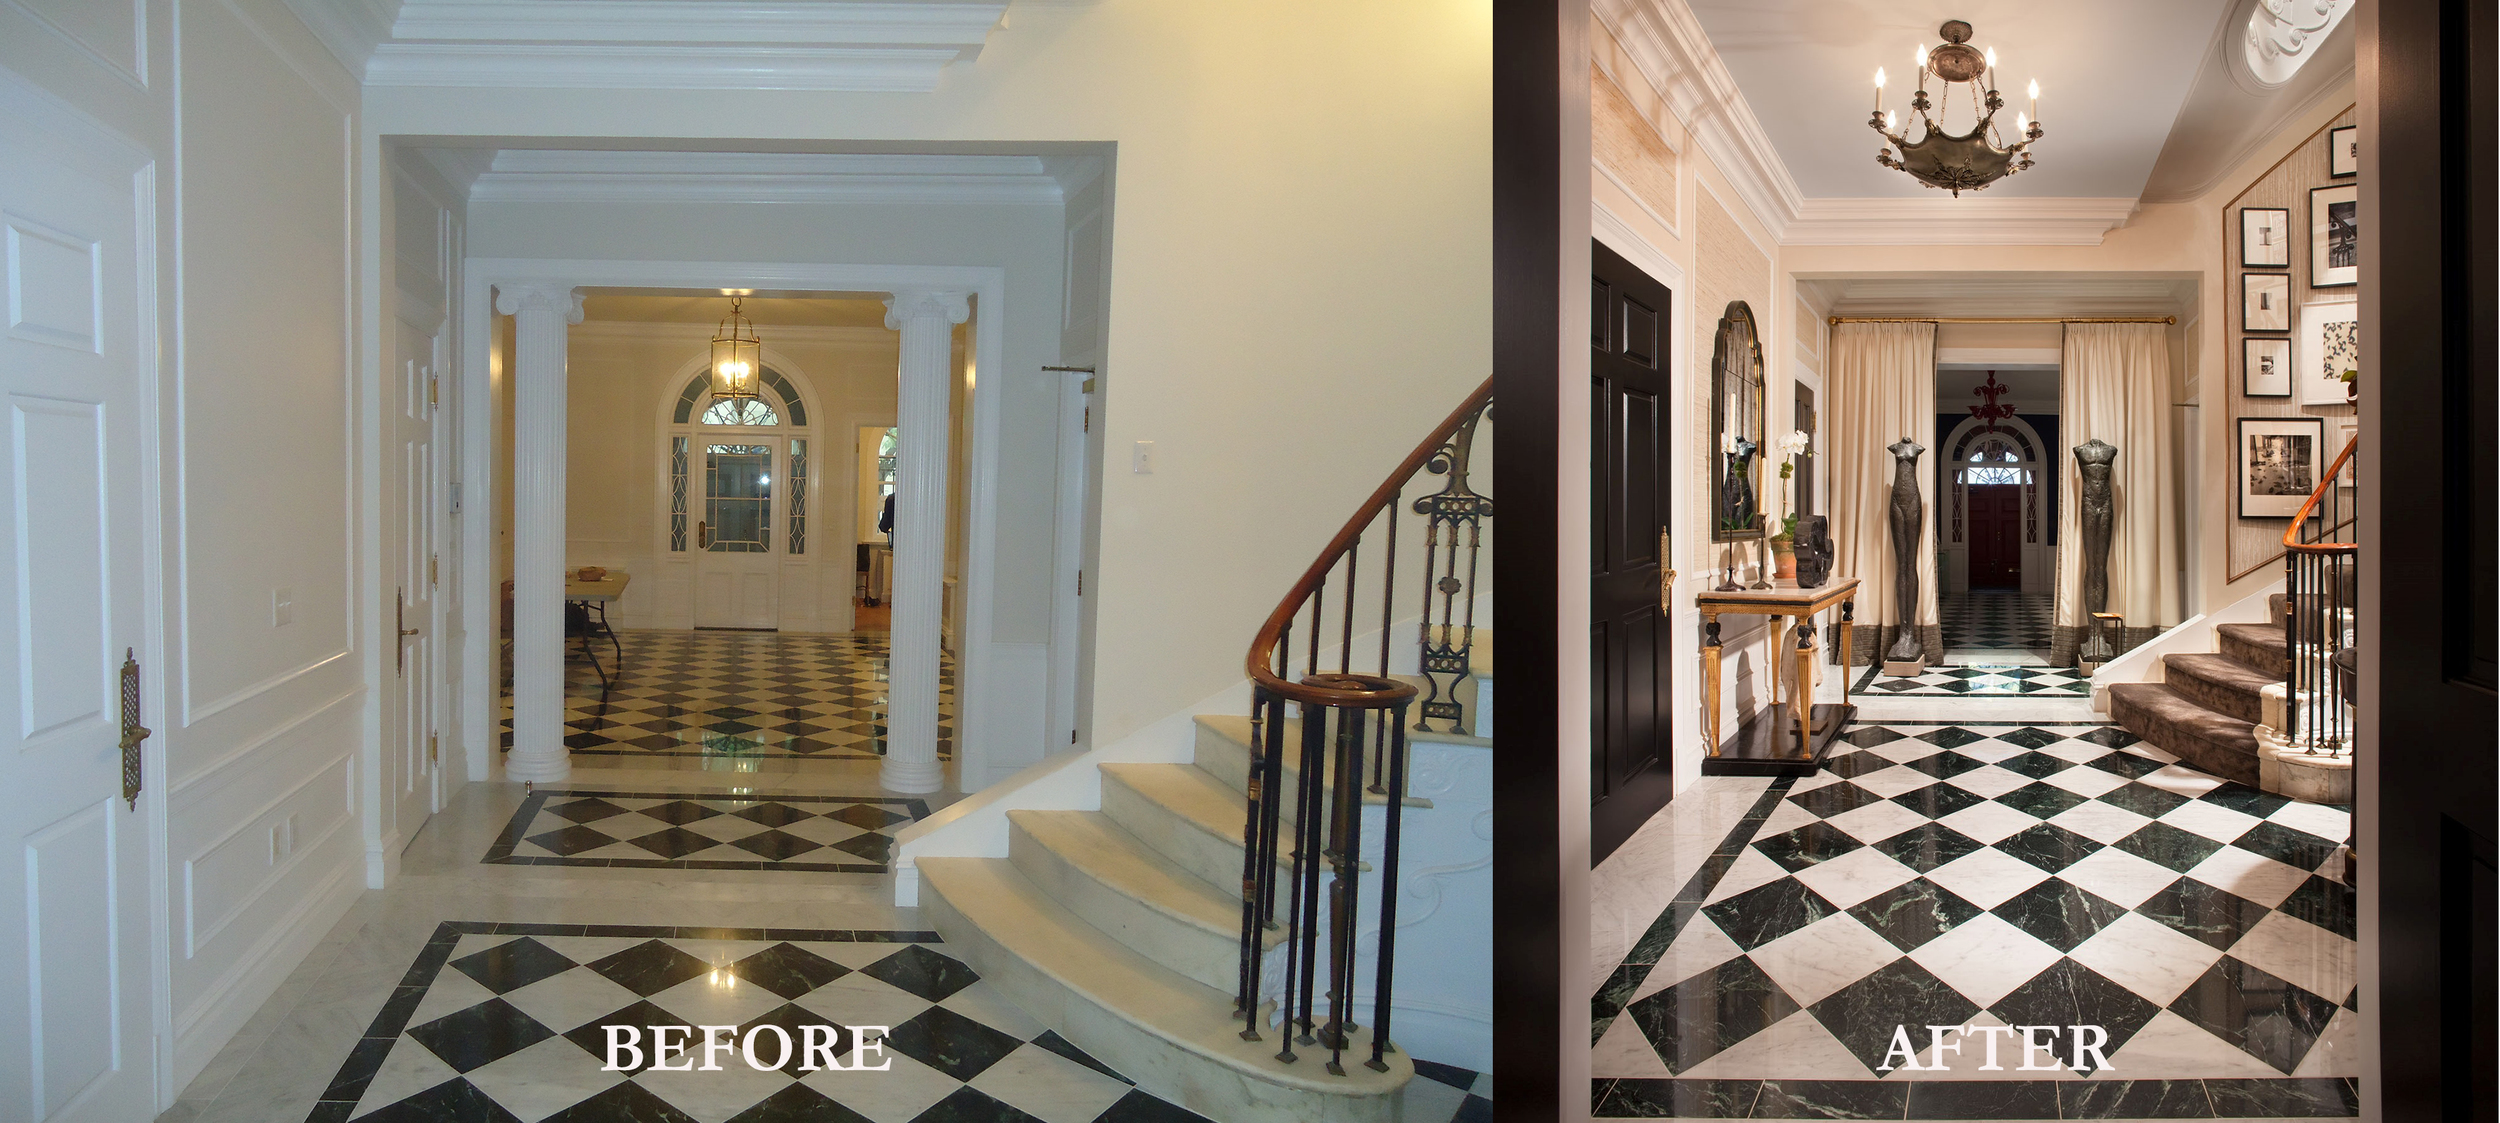 Rod Winterrowd | Before and After | Kips Bay Show House, NYC